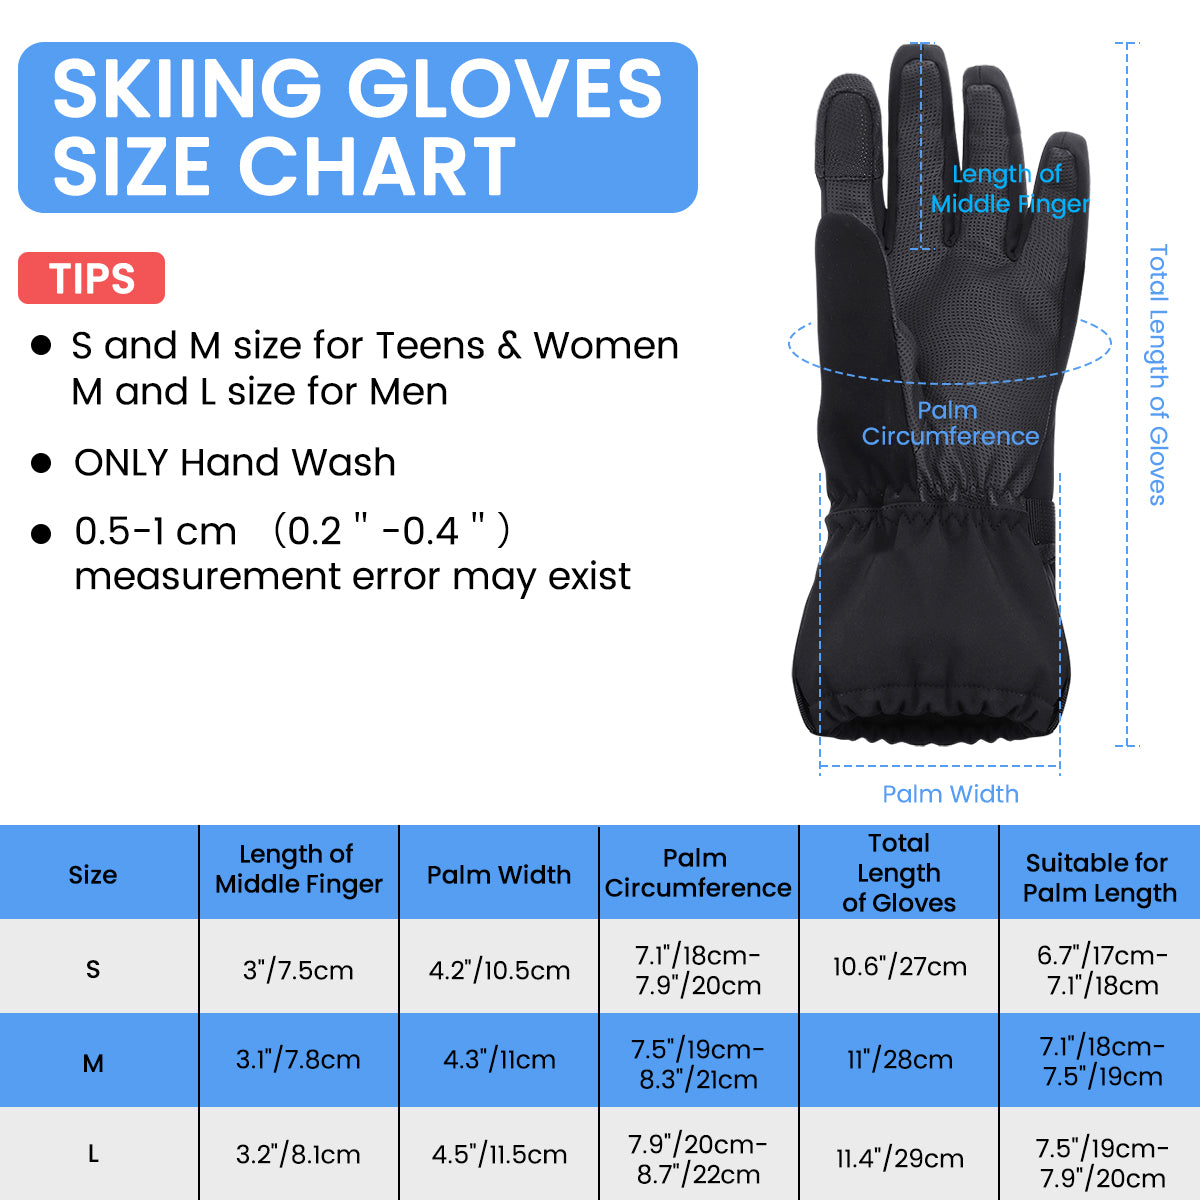 Motorcycle Bicycle Running Skiing Winter Touch Screen Gloves